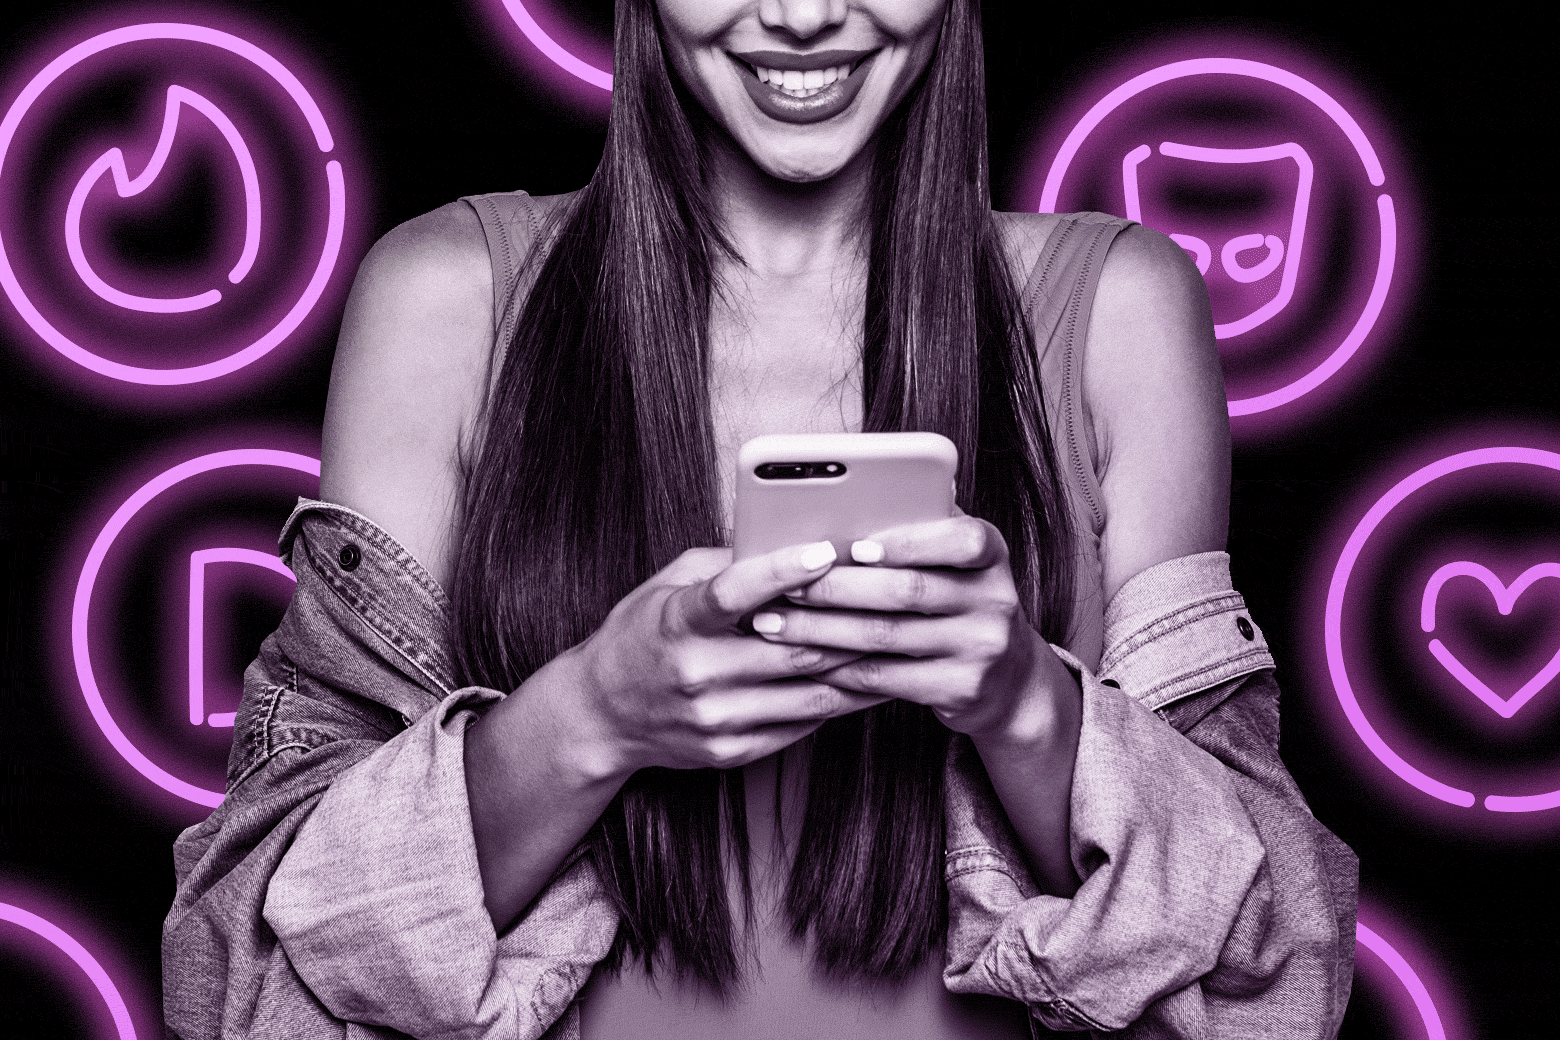 A woman smiles as she looks at a cellphone. Dating app logos are in the background in neon.